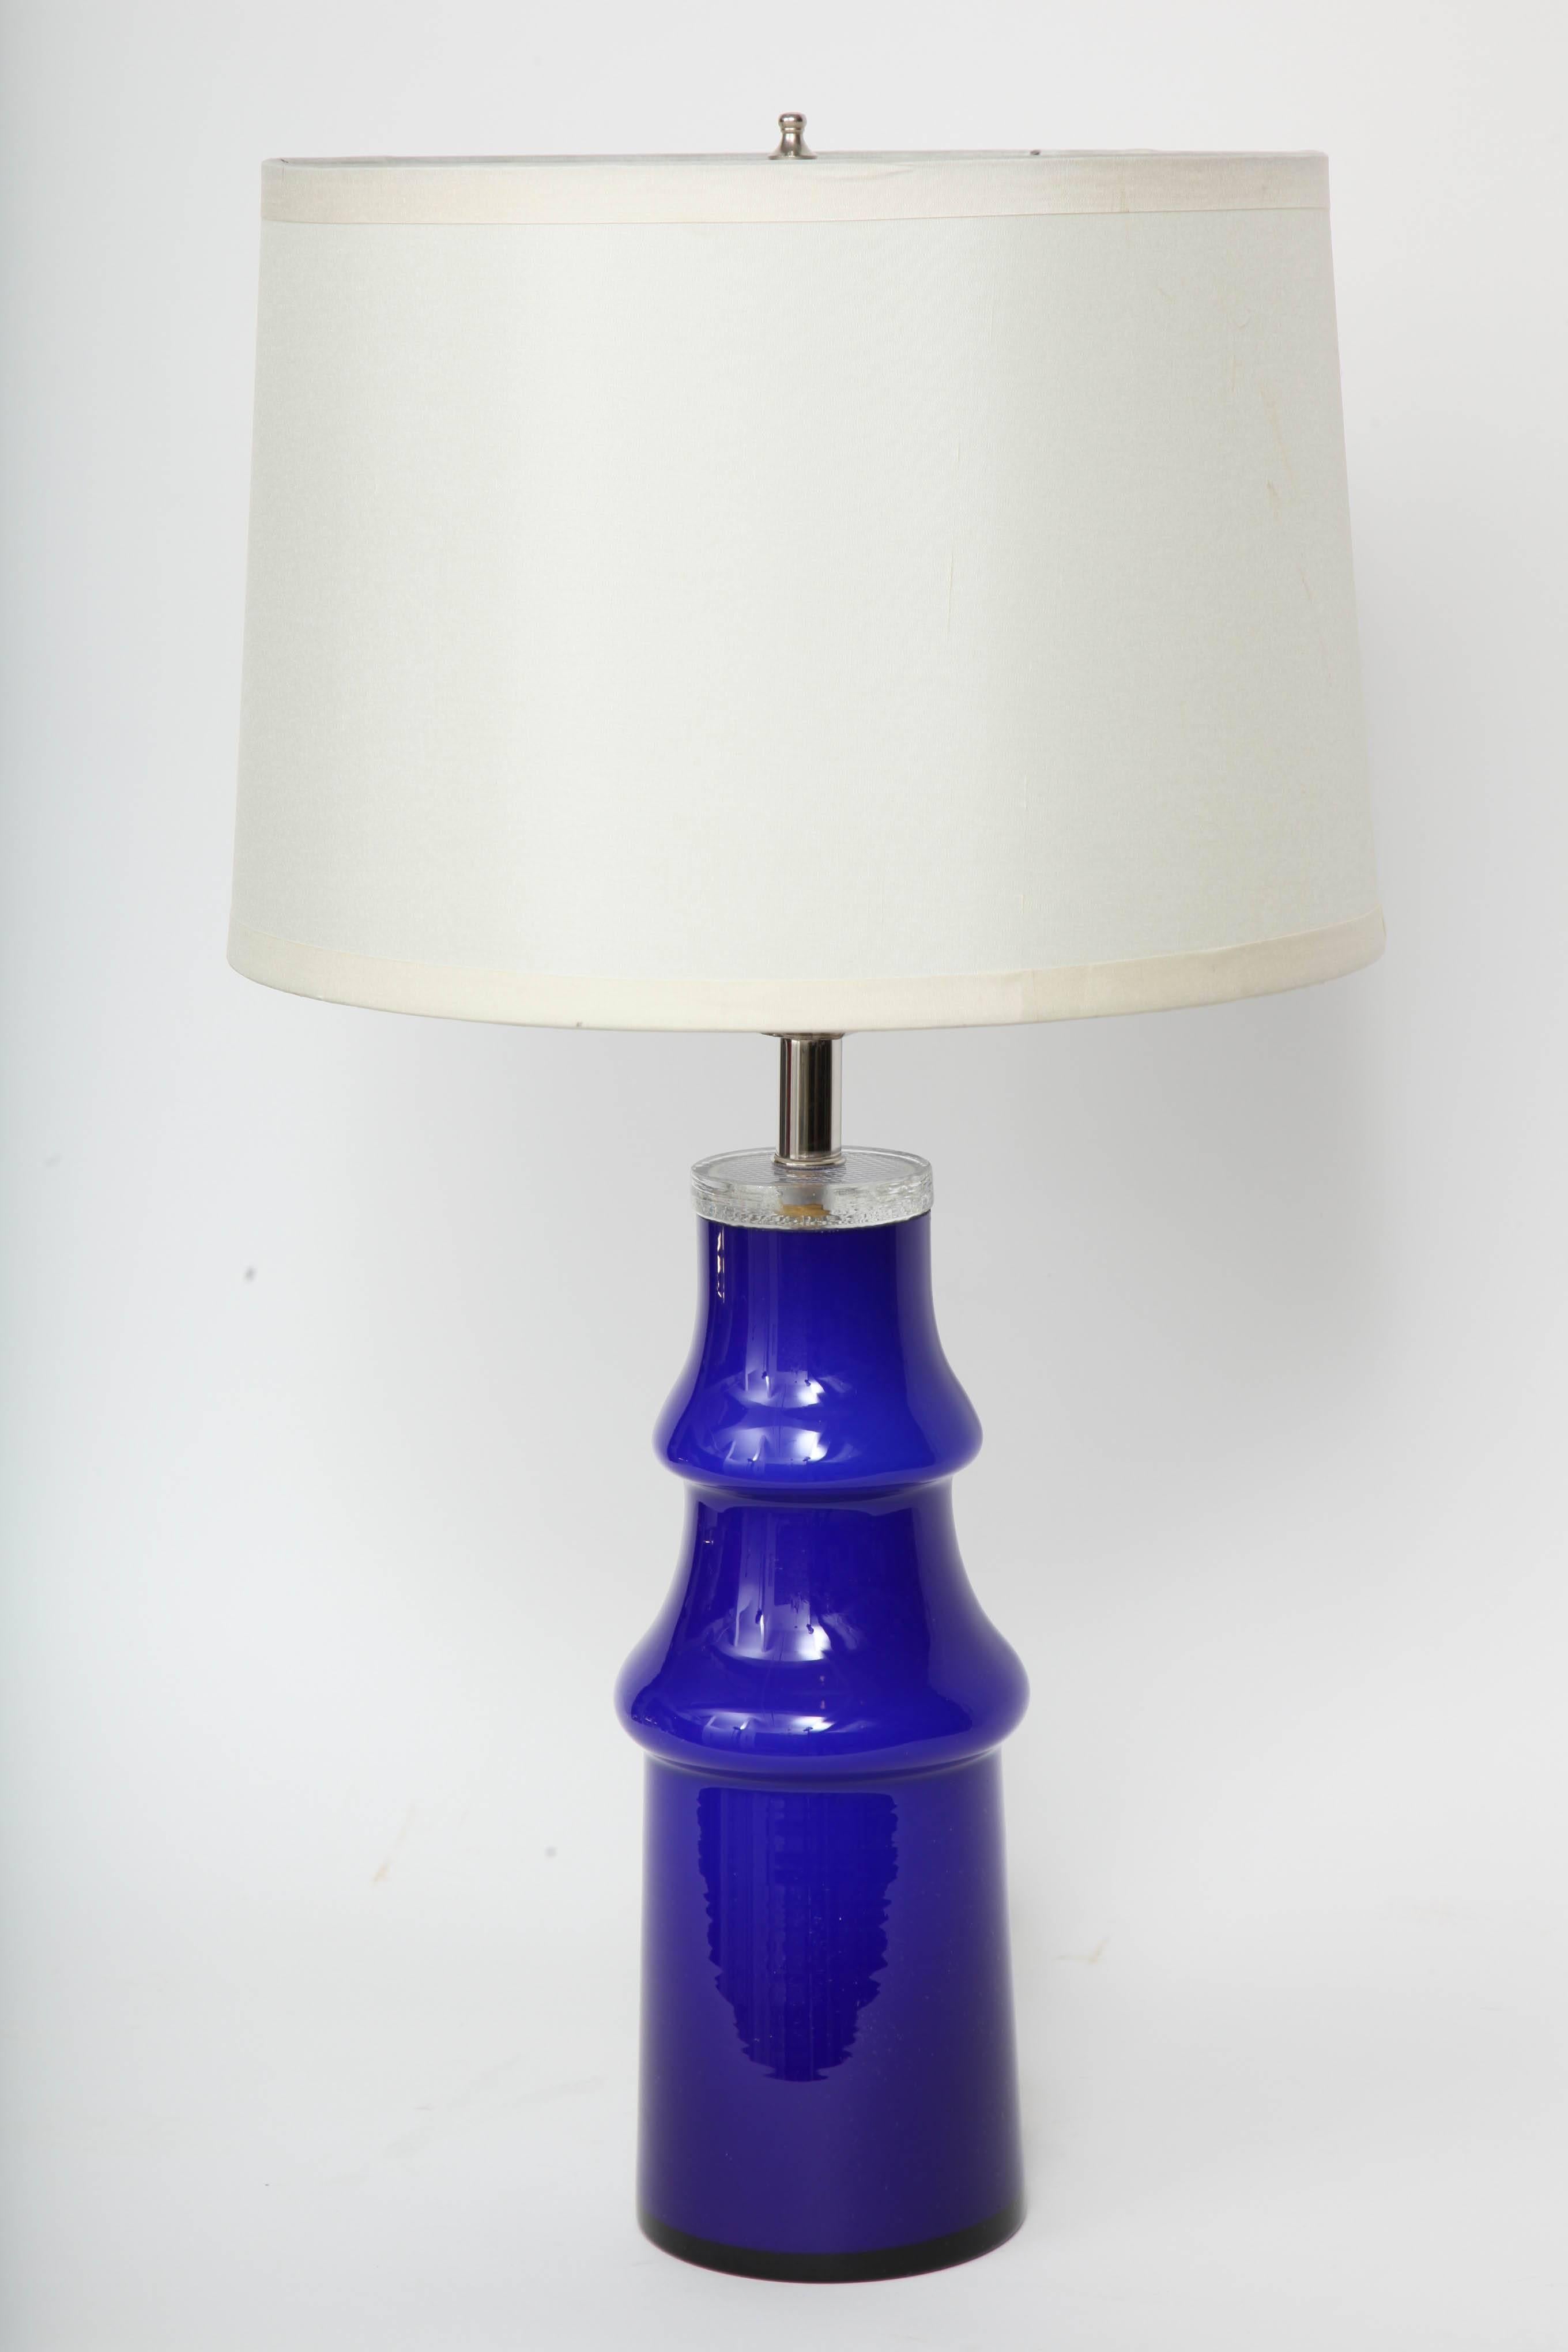 Swedish modern art glass lamp in a deep blue. Lamp has been rewired for the USA with nickel fittings and clear cord. 100W max bulb.